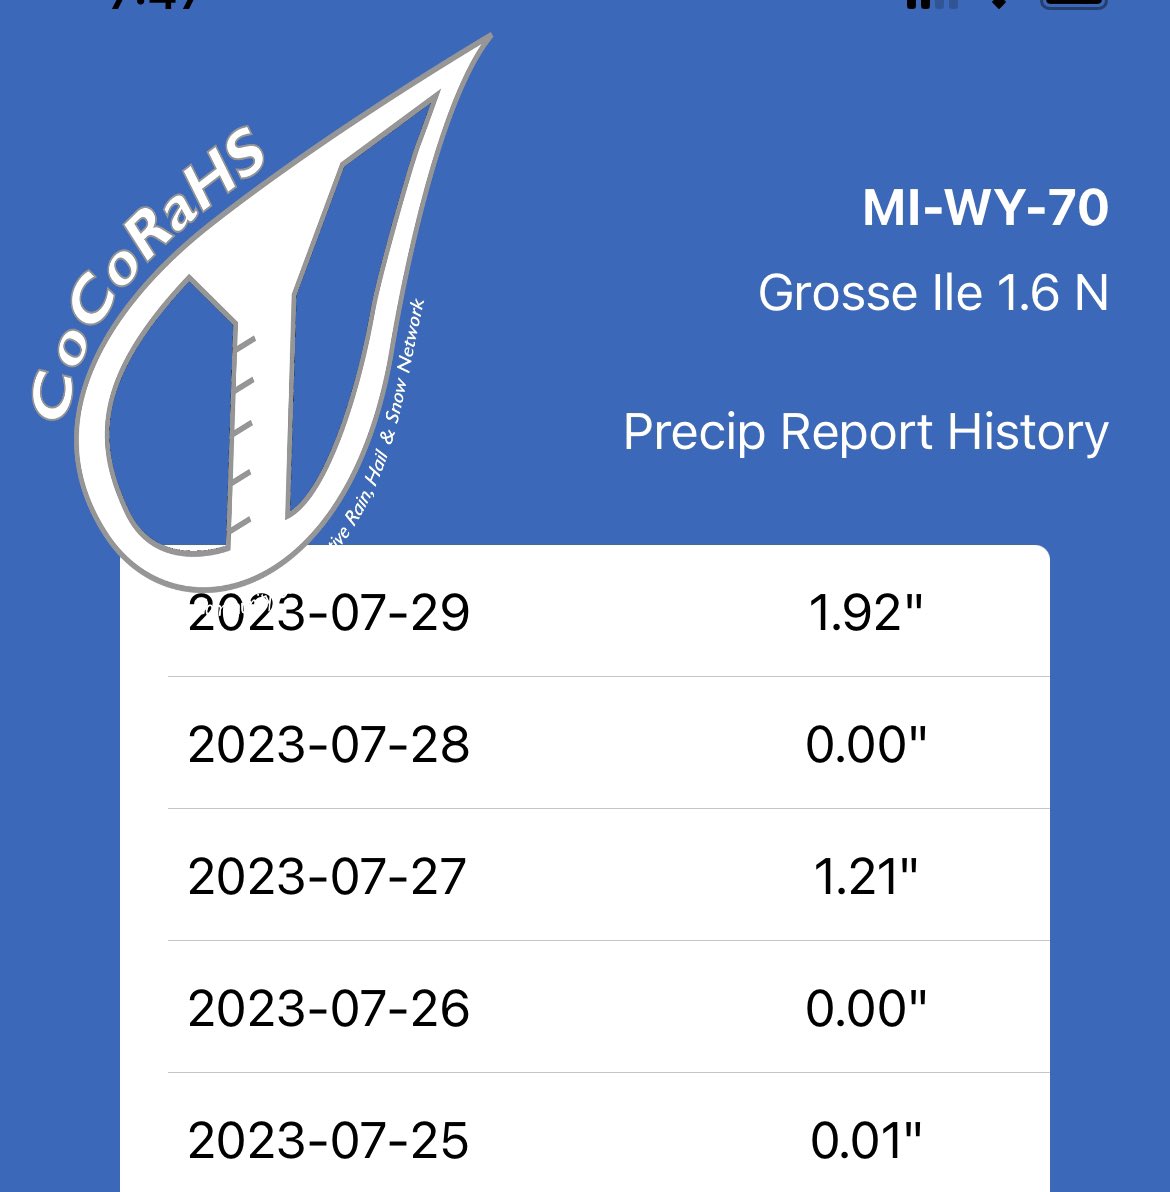 1.92” of precipitation collected at MI-WY-70 Grosse Ile, MI. There is still more rain coming down. Great for my lawn! @k12science @AshleeBaracy @GrossWeather @AndrewHumphrey @CoCoRaHS #GettingScienceDone 🌧️ ☔️